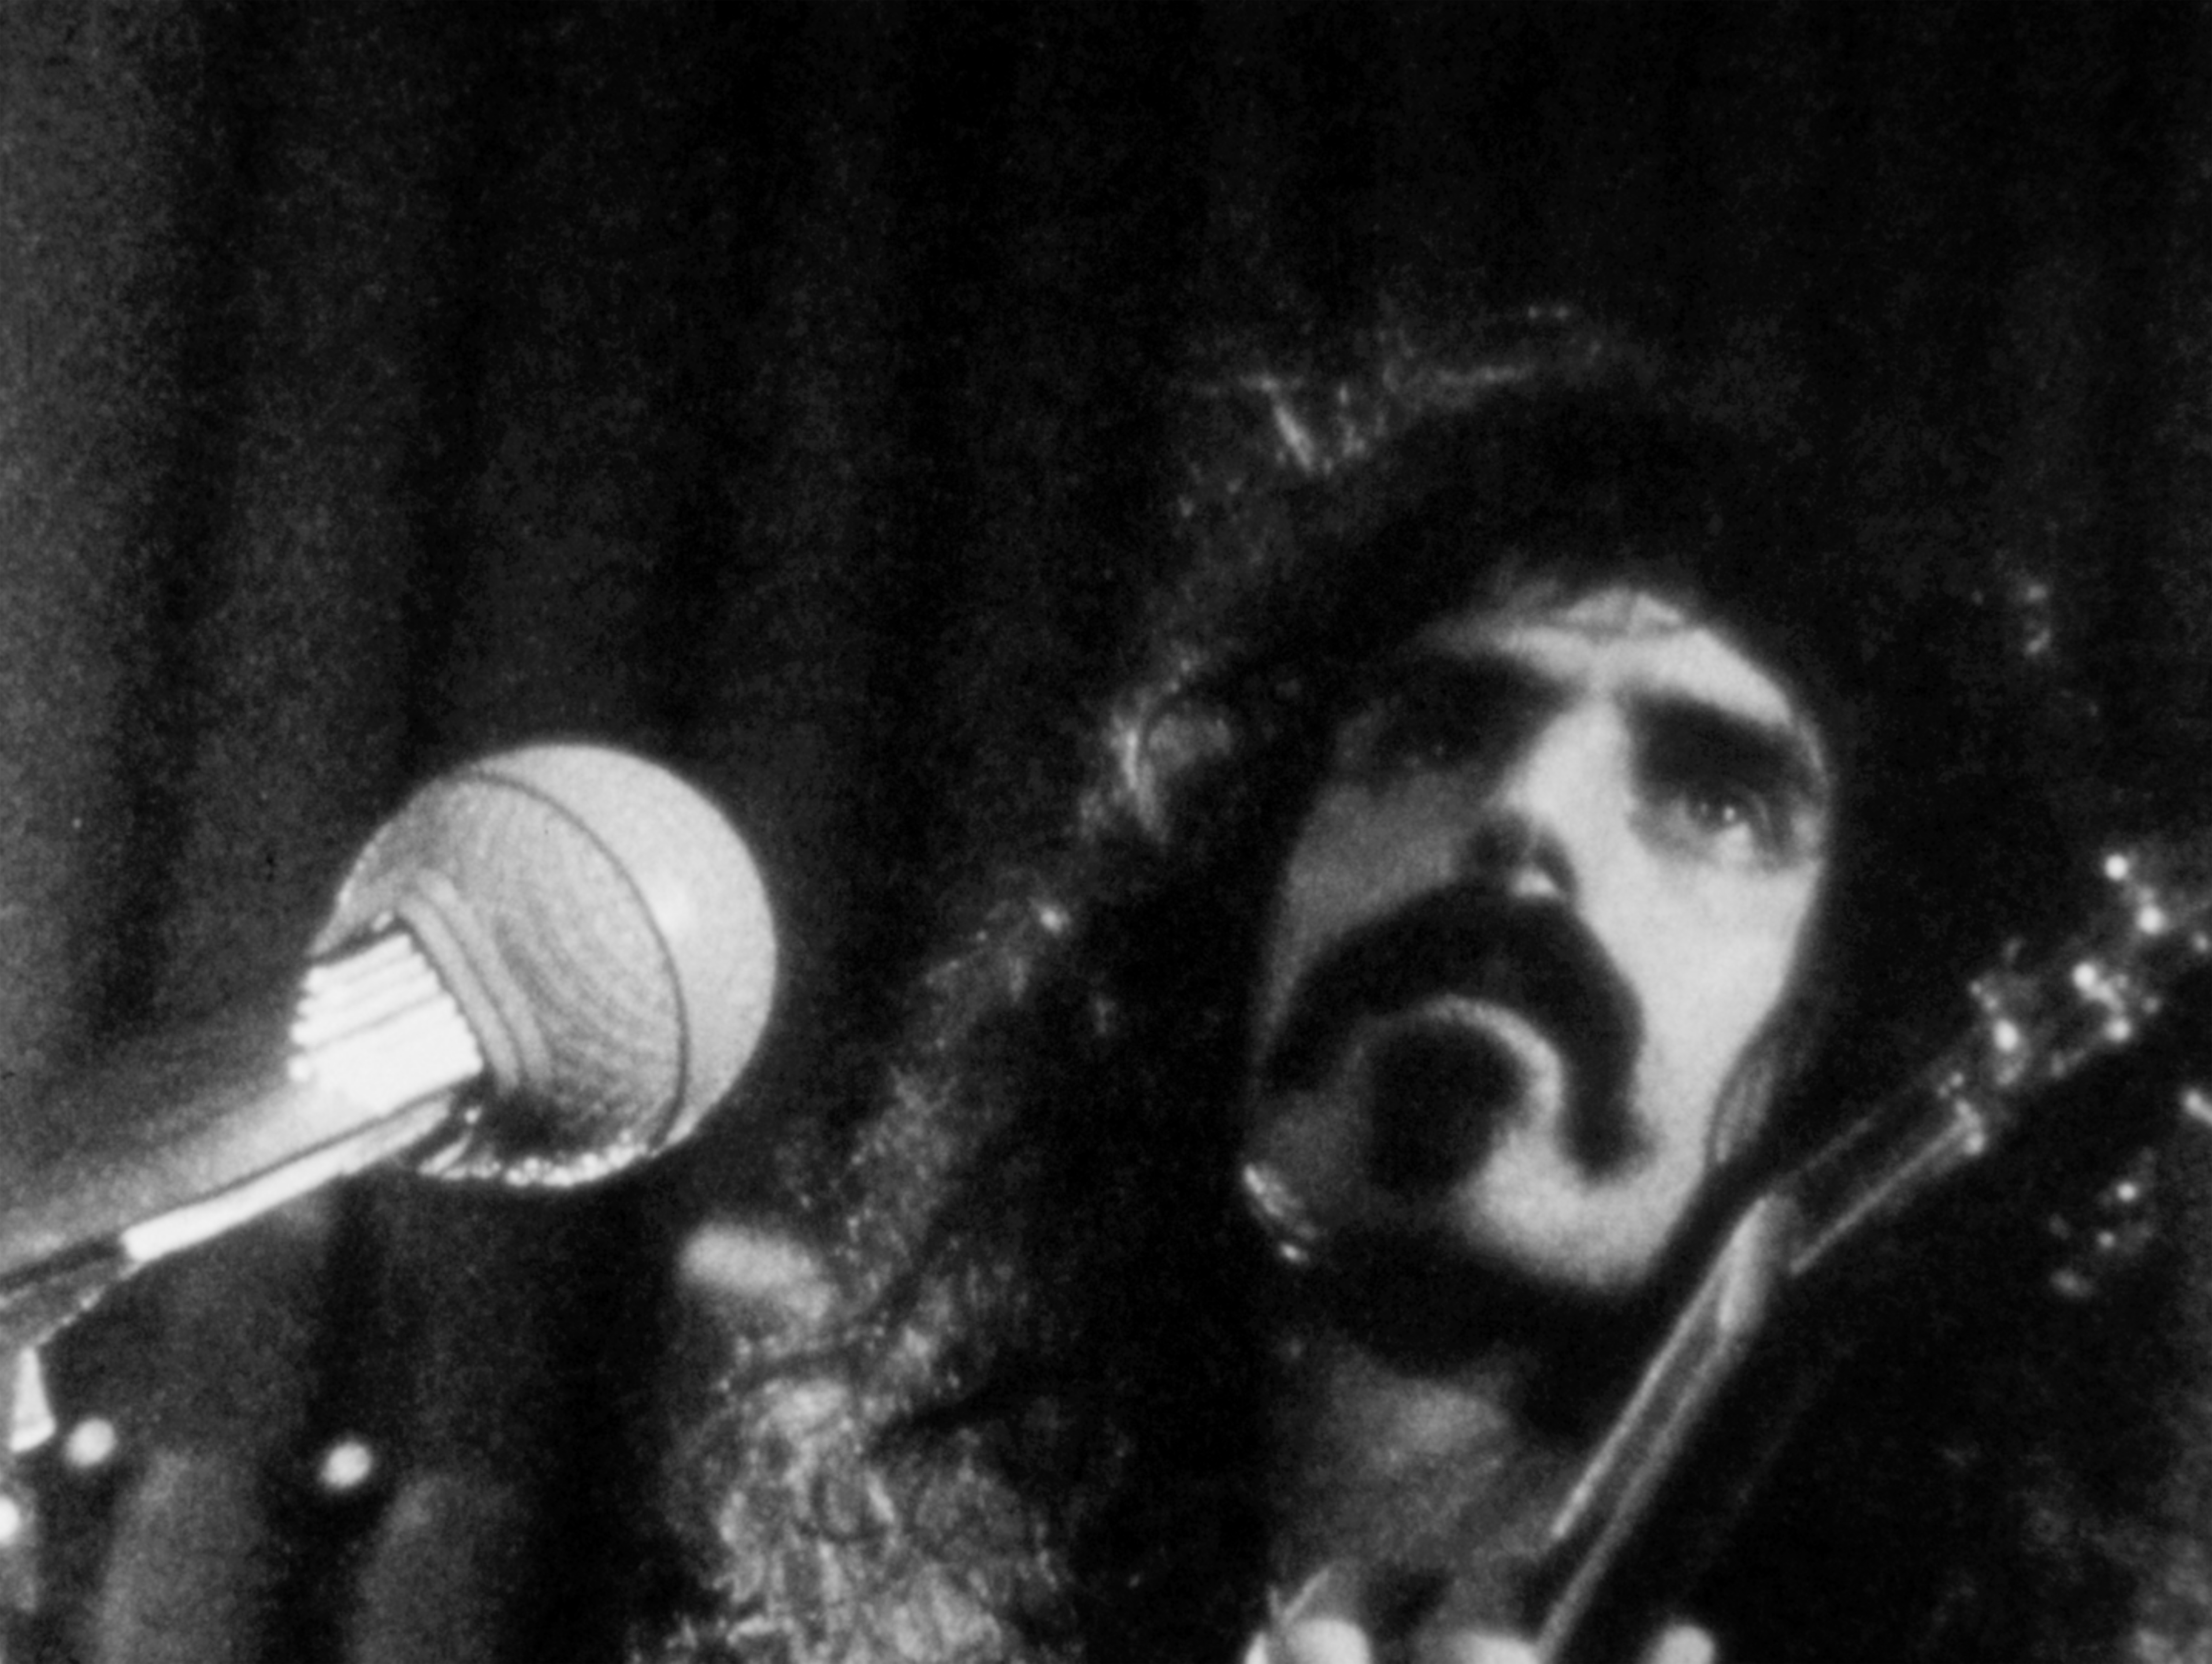 ART OF THE CUT with Mike J. Nichols, editor of the documentary "Zappa" 5